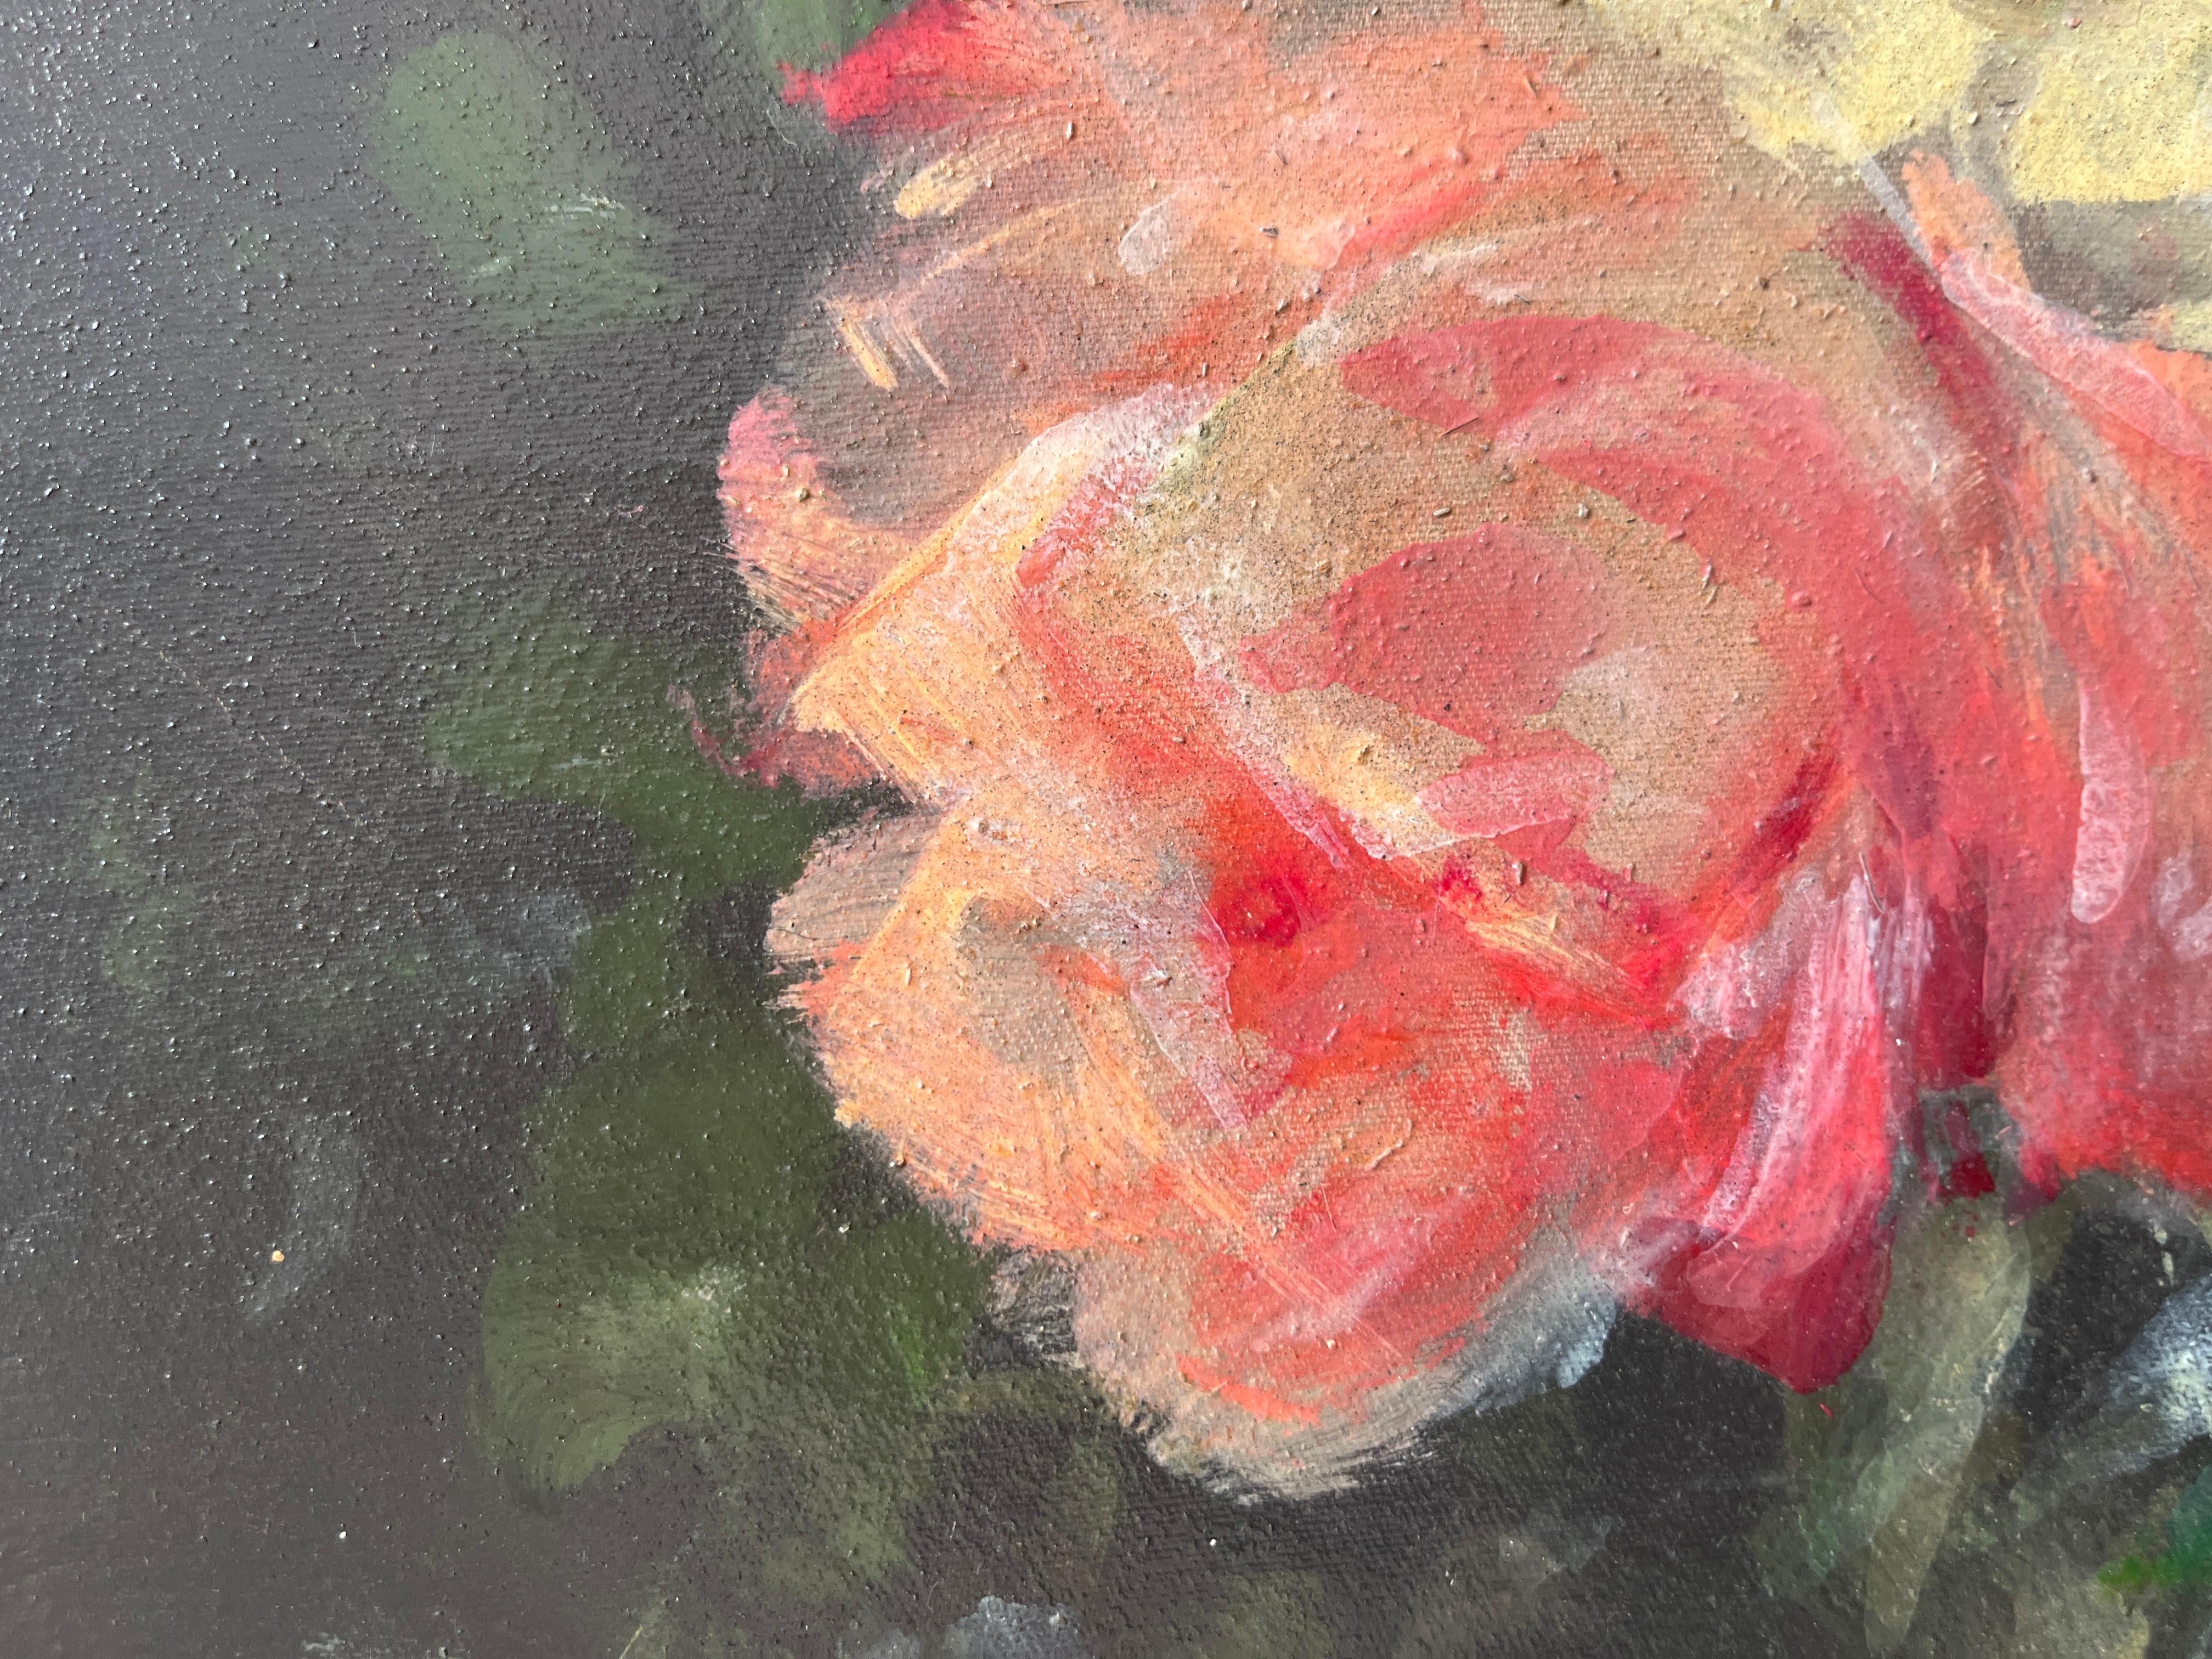 This stunning bouquet of roses exudes a vibrant energy through the artist's expressive energy. It is a perfect balance between freedom and control, allowing the subject matter to come to life on the canvas. The brushstrokes possess a dynamic